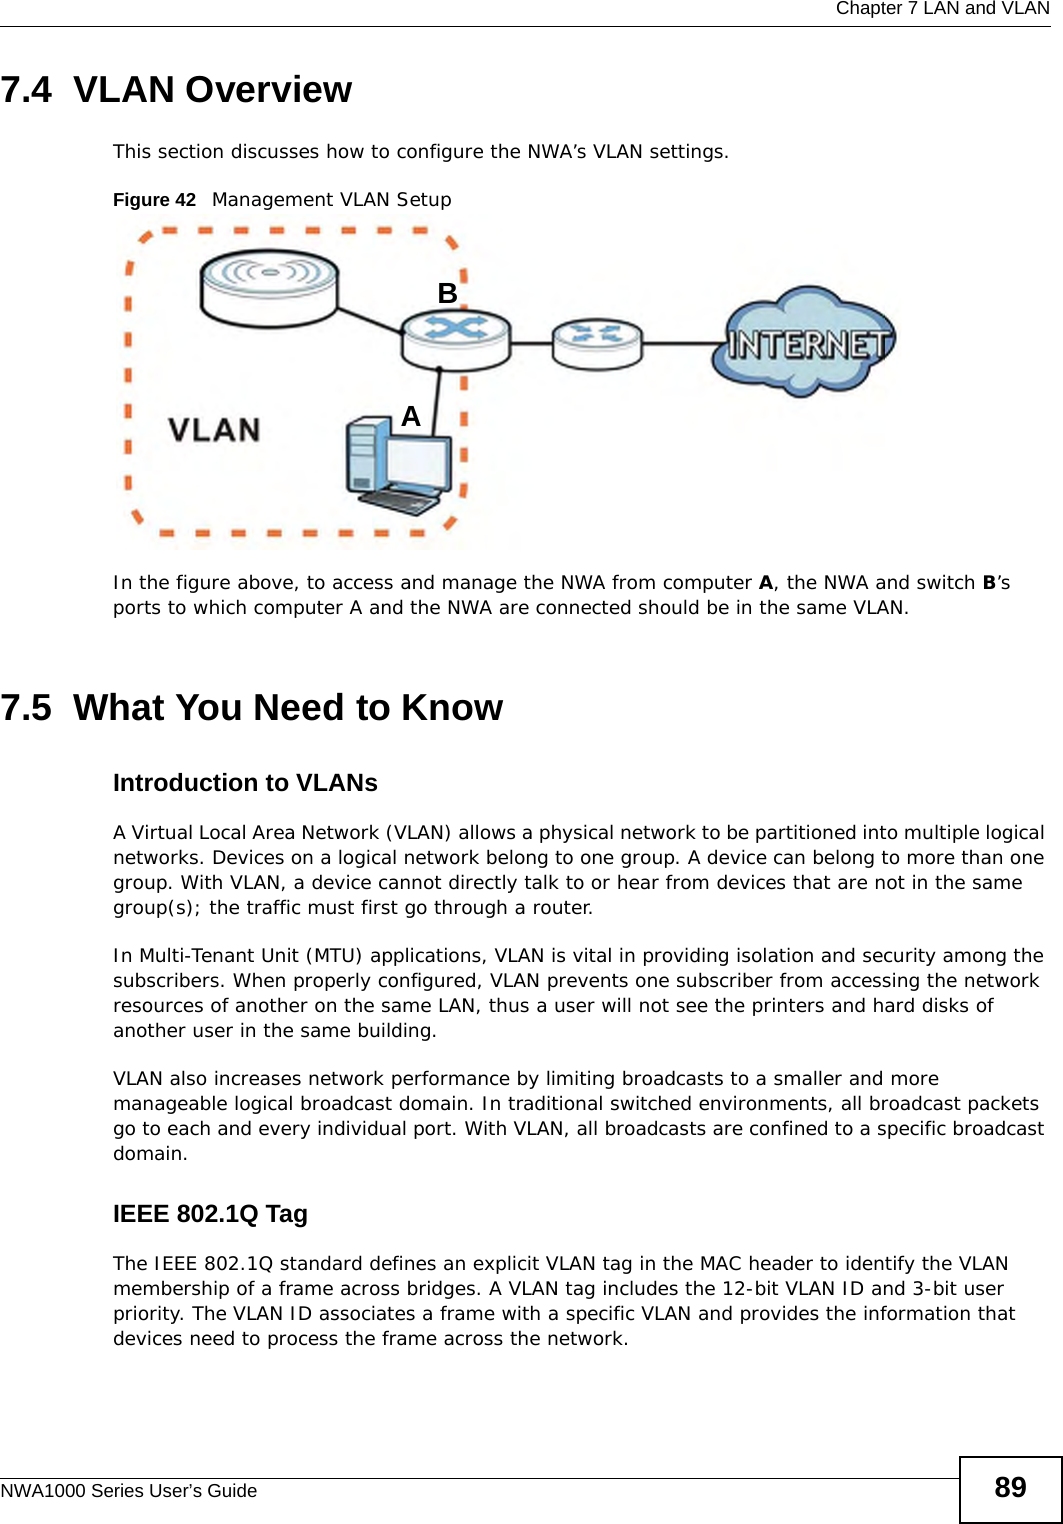  Chapter 7 LAN and VLANNWA1000 Series User’s Guide 897.4  VLAN OverviewThis section discusses how to configure the NWA’s VLAN settings.Figure 42   Management VLAN SetupIn the figure above, to access and manage the NWA from computer A, the NWA and switch B’s ports to which computer A and the NWA are connected should be in the same VLAN.7.5  What You Need to KnowIntroduction to VLANs A Virtual Local Area Network (VLAN) allows a physical network to be partitioned into multiple logical networks. Devices on a logical network belong to one group. A device can belong to more than one group. With VLAN, a device cannot directly talk to or hear from devices that are not in the same group(s); the traffic must first go through a router.In Multi-Tenant Unit (MTU) applications, VLAN is vital in providing isolation and security among the subscribers. When properly configured, VLAN prevents one subscriber from accessing the network resources of another on the same LAN, thus a user will not see the printers and hard disks of another user in the same building. VLAN also increases network performance by limiting broadcasts to a smaller and more manageable logical broadcast domain. In traditional switched environments, all broadcast packets go to each and every individual port. With VLAN, all broadcasts are confined to a specific broadcast domain. IEEE 802.1Q TagThe IEEE 802.1Q standard defines an explicit VLAN tag in the MAC header to identify the VLAN membership of a frame across bridges. A VLAN tag includes the 12-bit VLAN ID and 3-bit user priority. The VLAN ID associates a frame with a specific VLAN and provides the information that devices need to process the frame across the network. AB